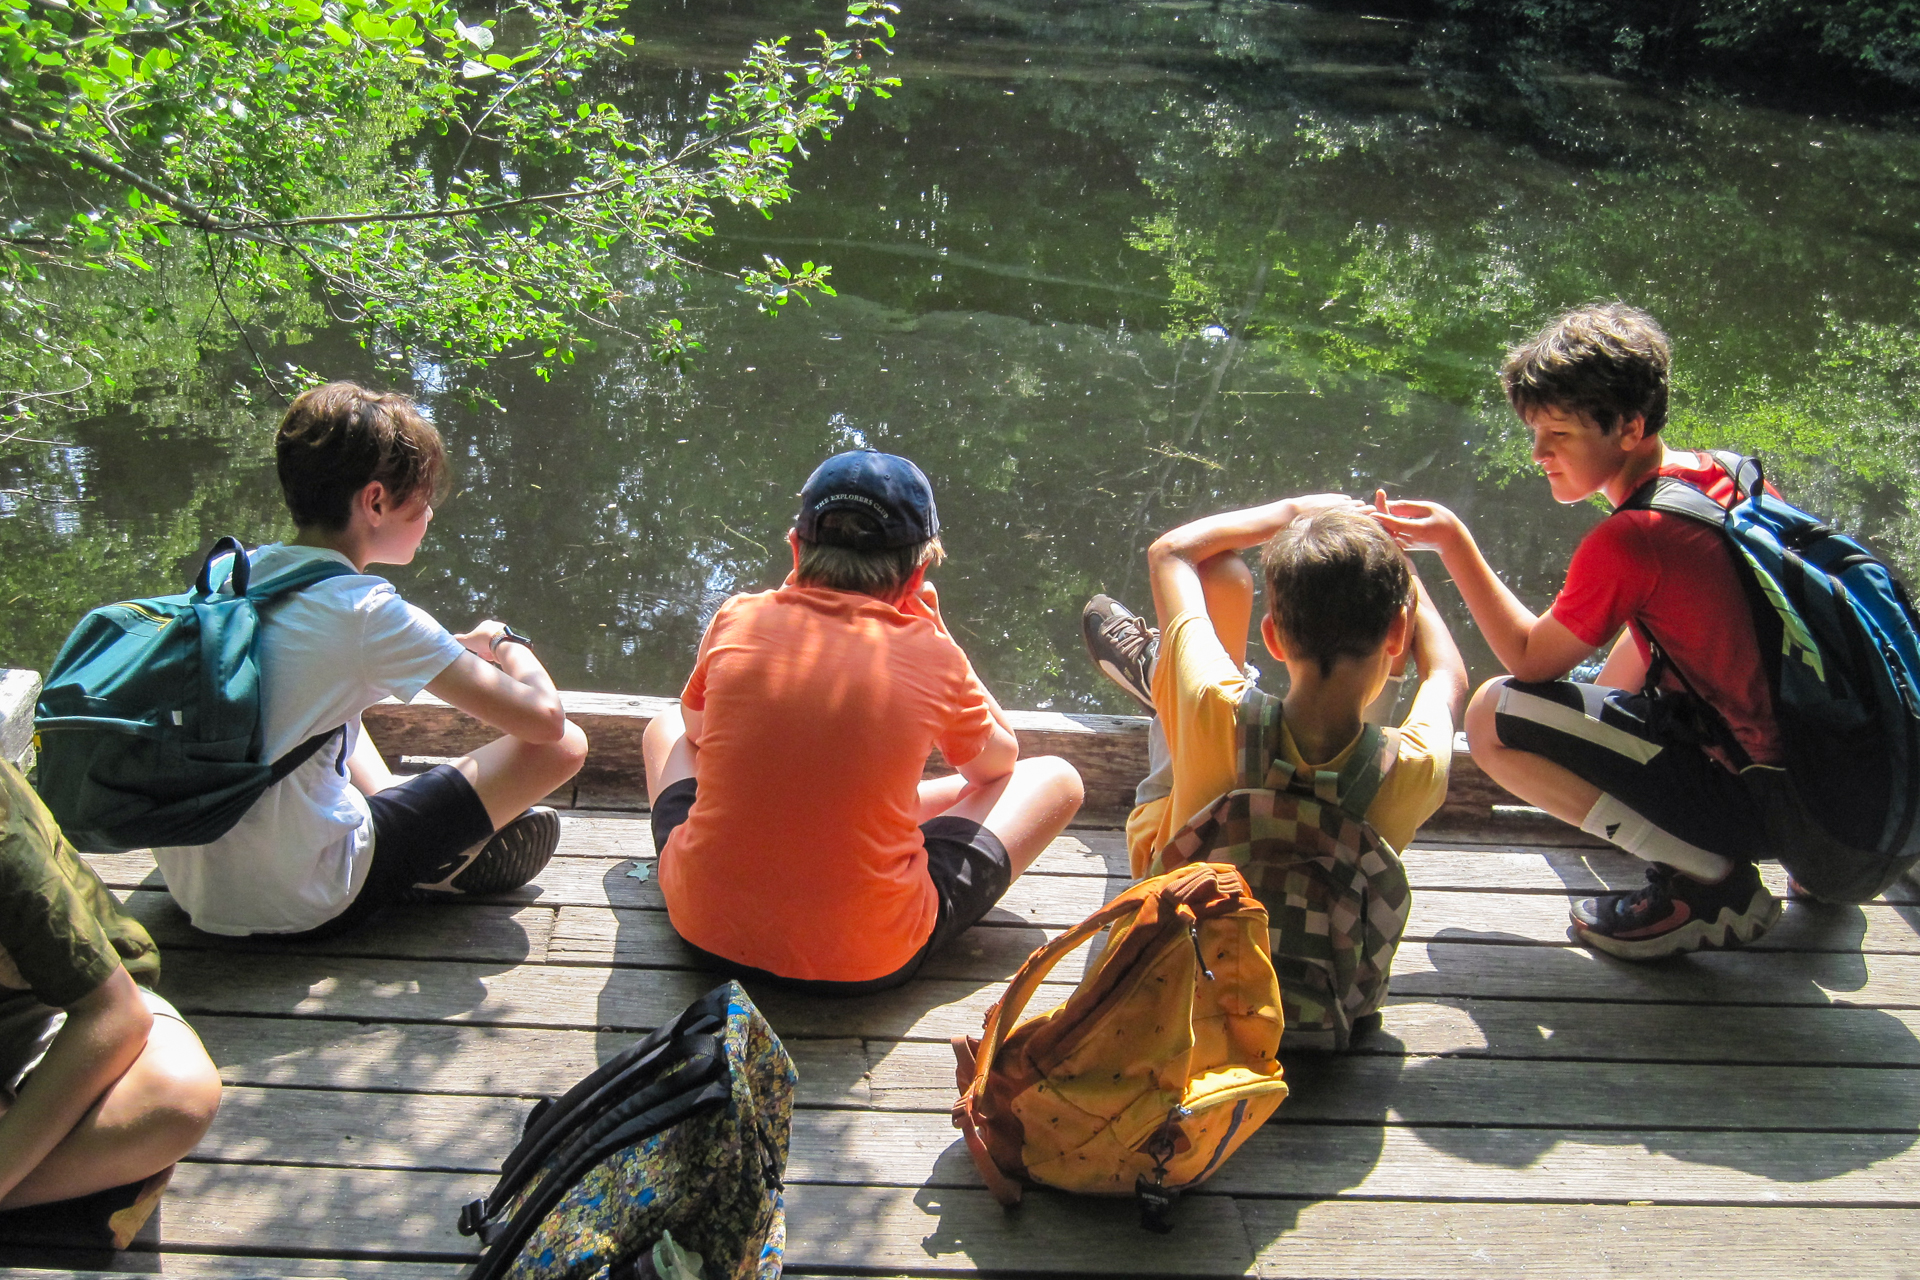 A group of campers at Habitat Nature Camp taking a break to sit at the edge of the observation deck overlooking the pond